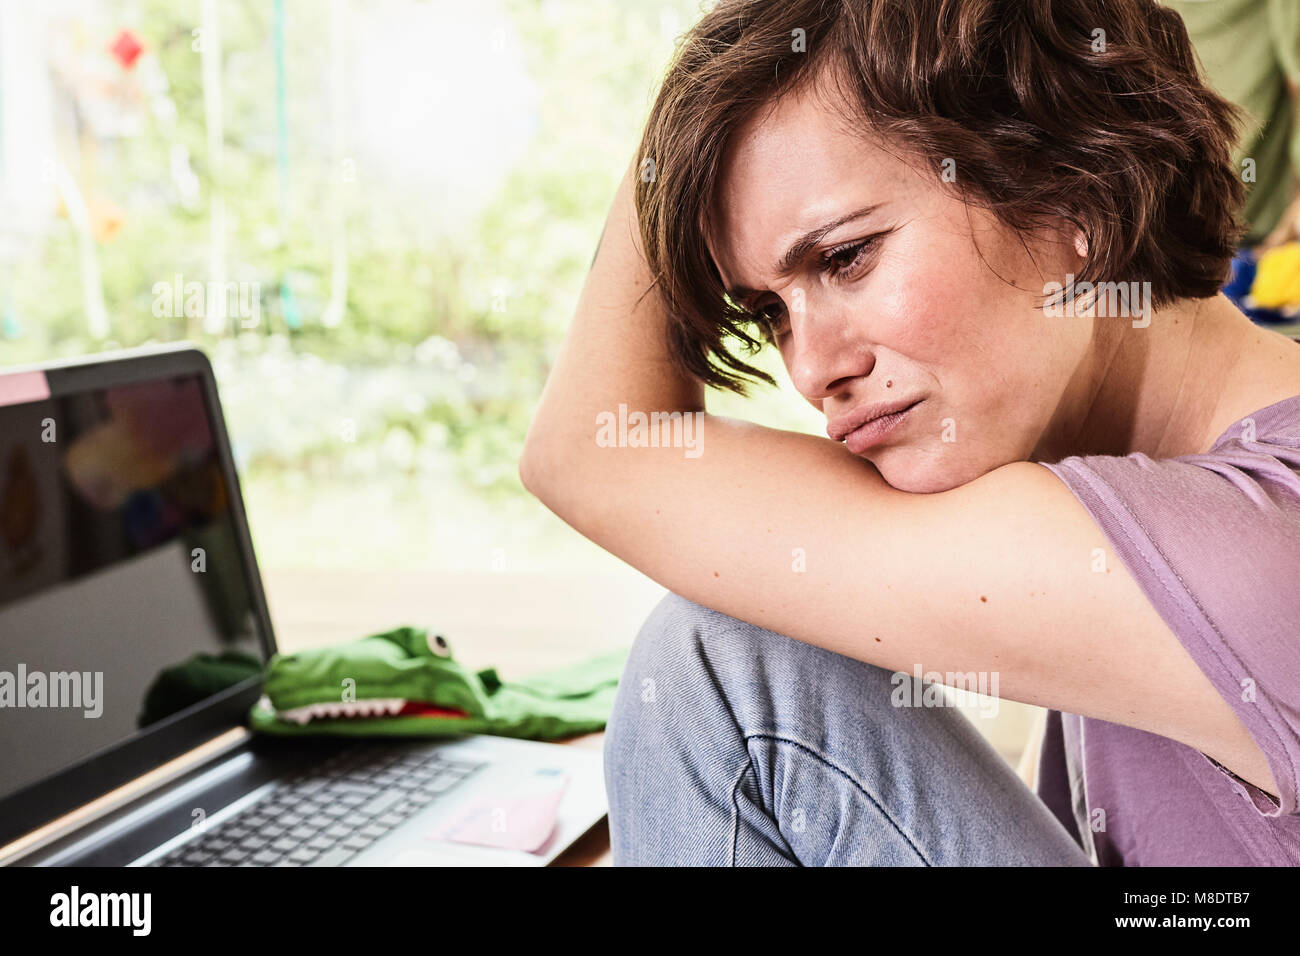 Mid adult woman at home, using laptop, worried expression Stock Photo